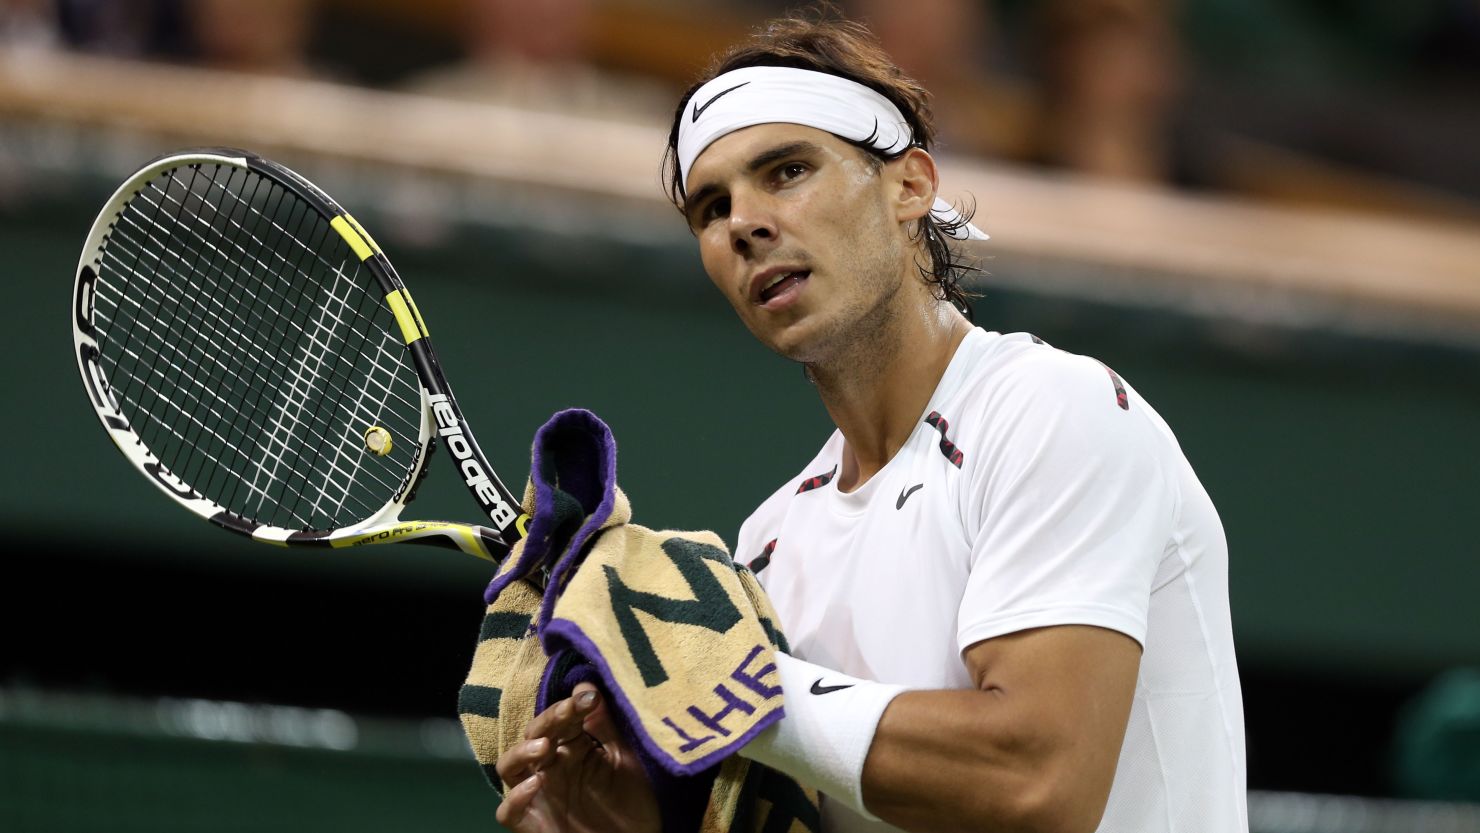 Rafael Nadal has been out of action since his shock second-round exit from Wimbledon in June